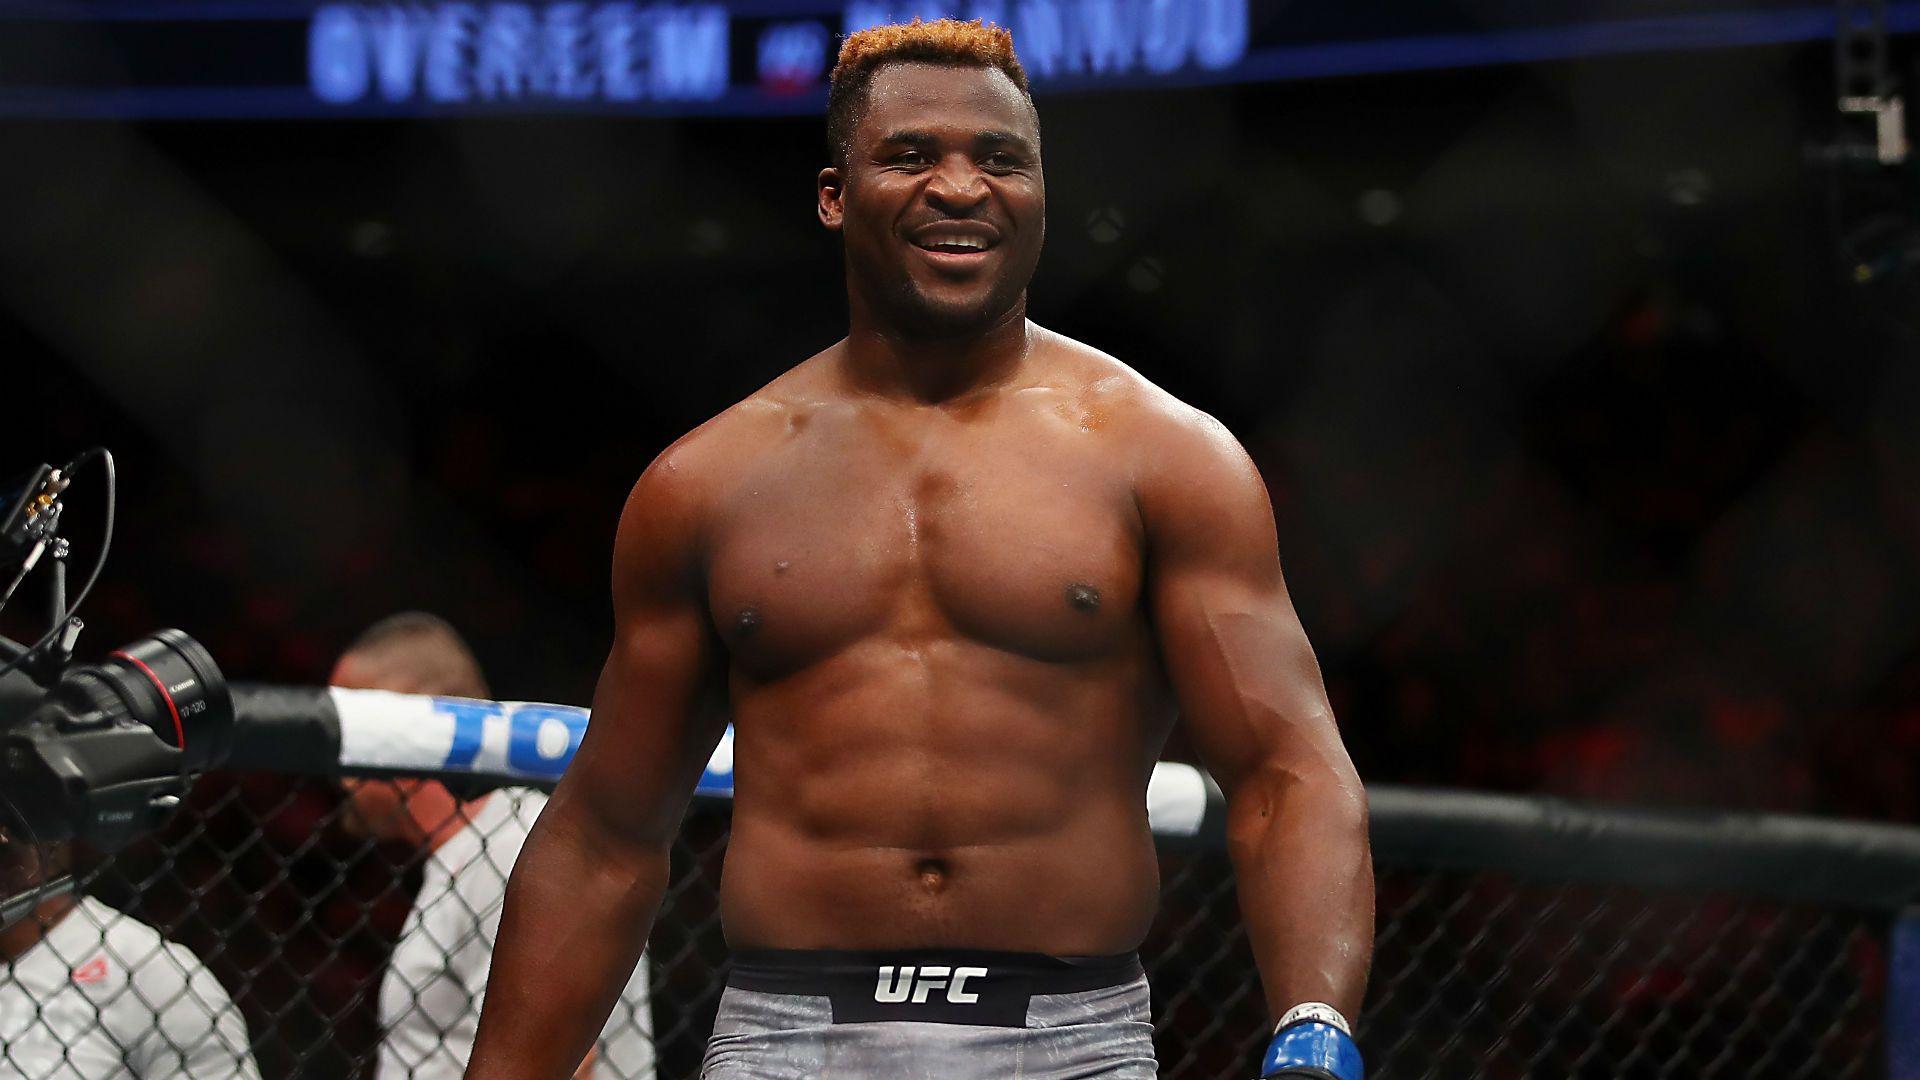 UFC 220: Stipe Miocic vs. Francis Ngannou will be the pinnacle